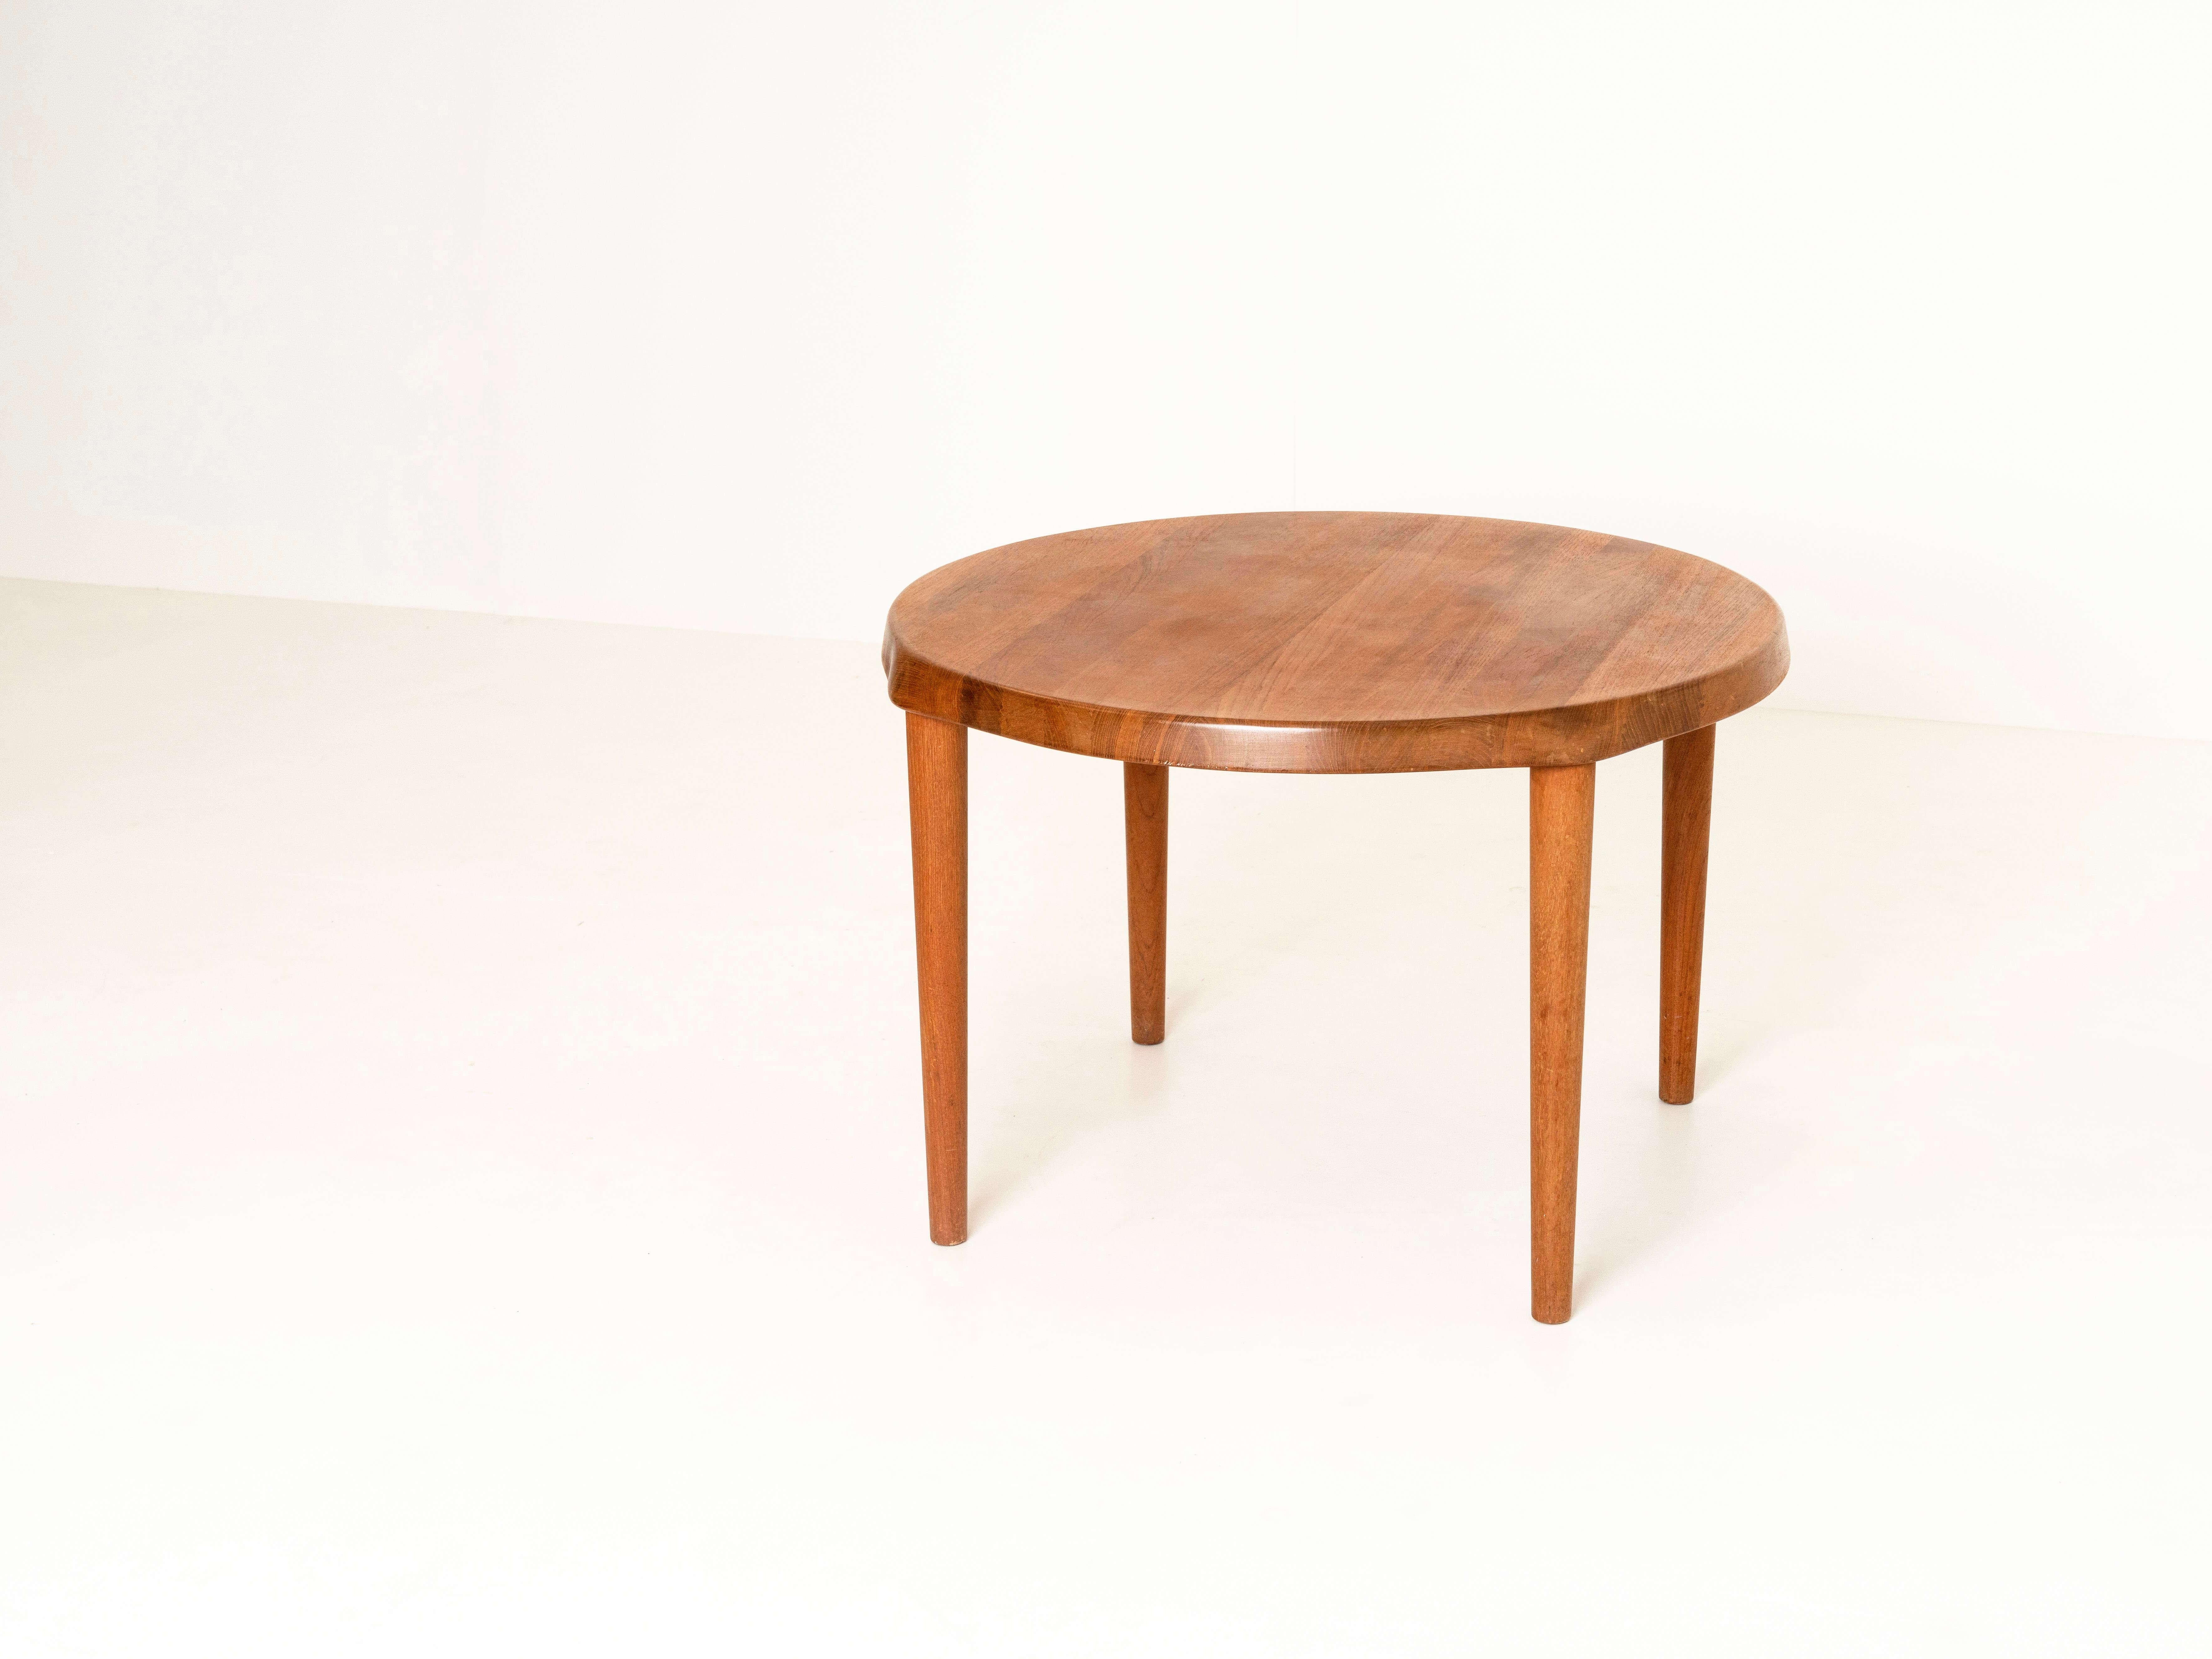 Robust teak round coffee table by John Boné for Mikael Laursen from Denmark, the 1960s. This table is quite heavy and has a top that is 5 cm thick. The legs have a slight coned shape and the top has a nice detail above each leg. The table is in very